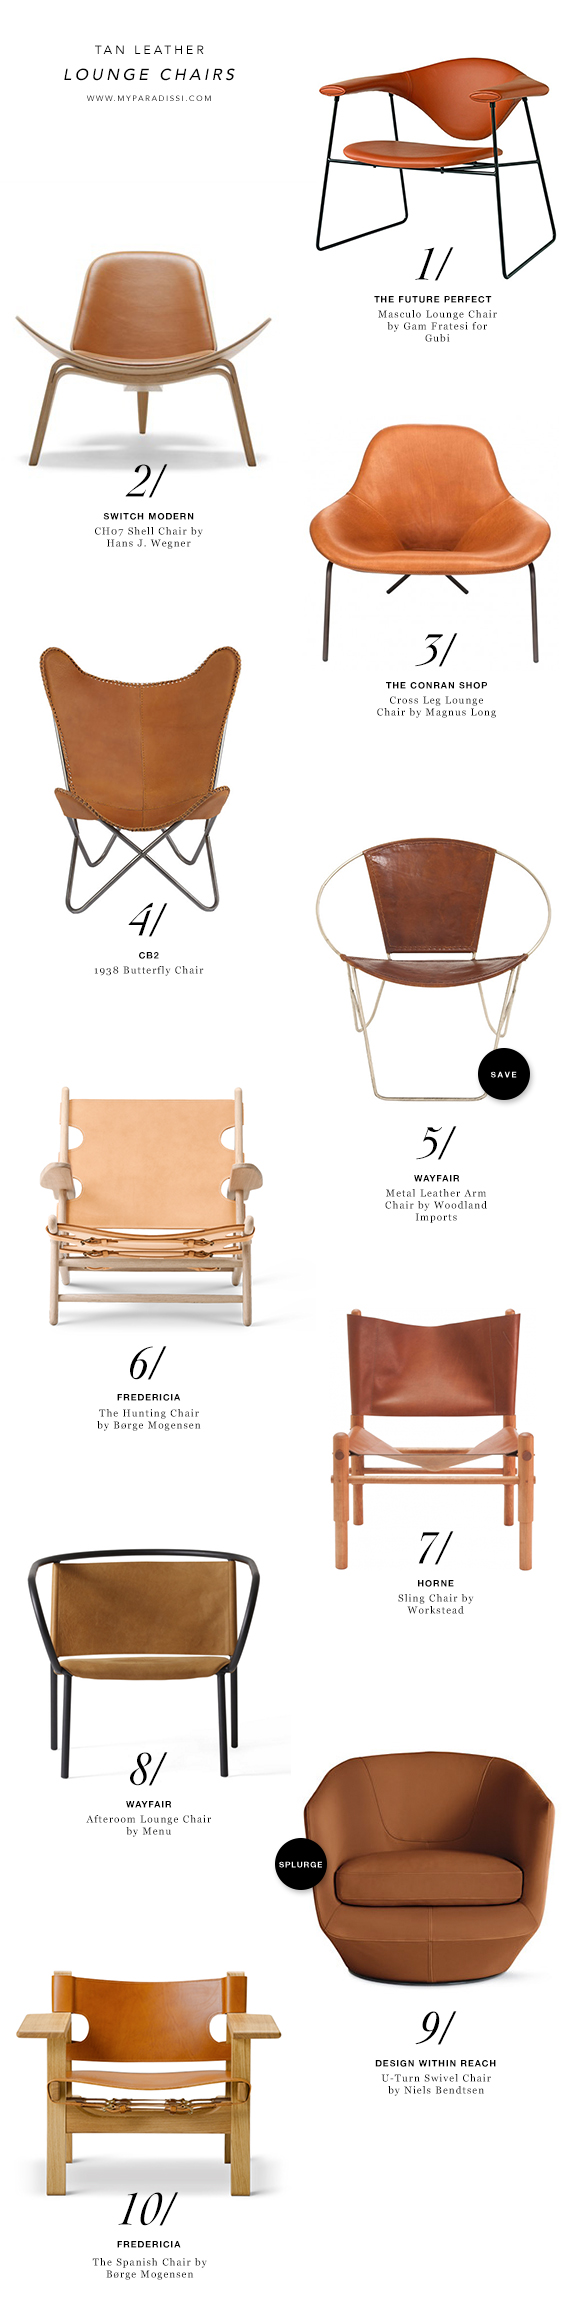 Tan leather lounge chairs